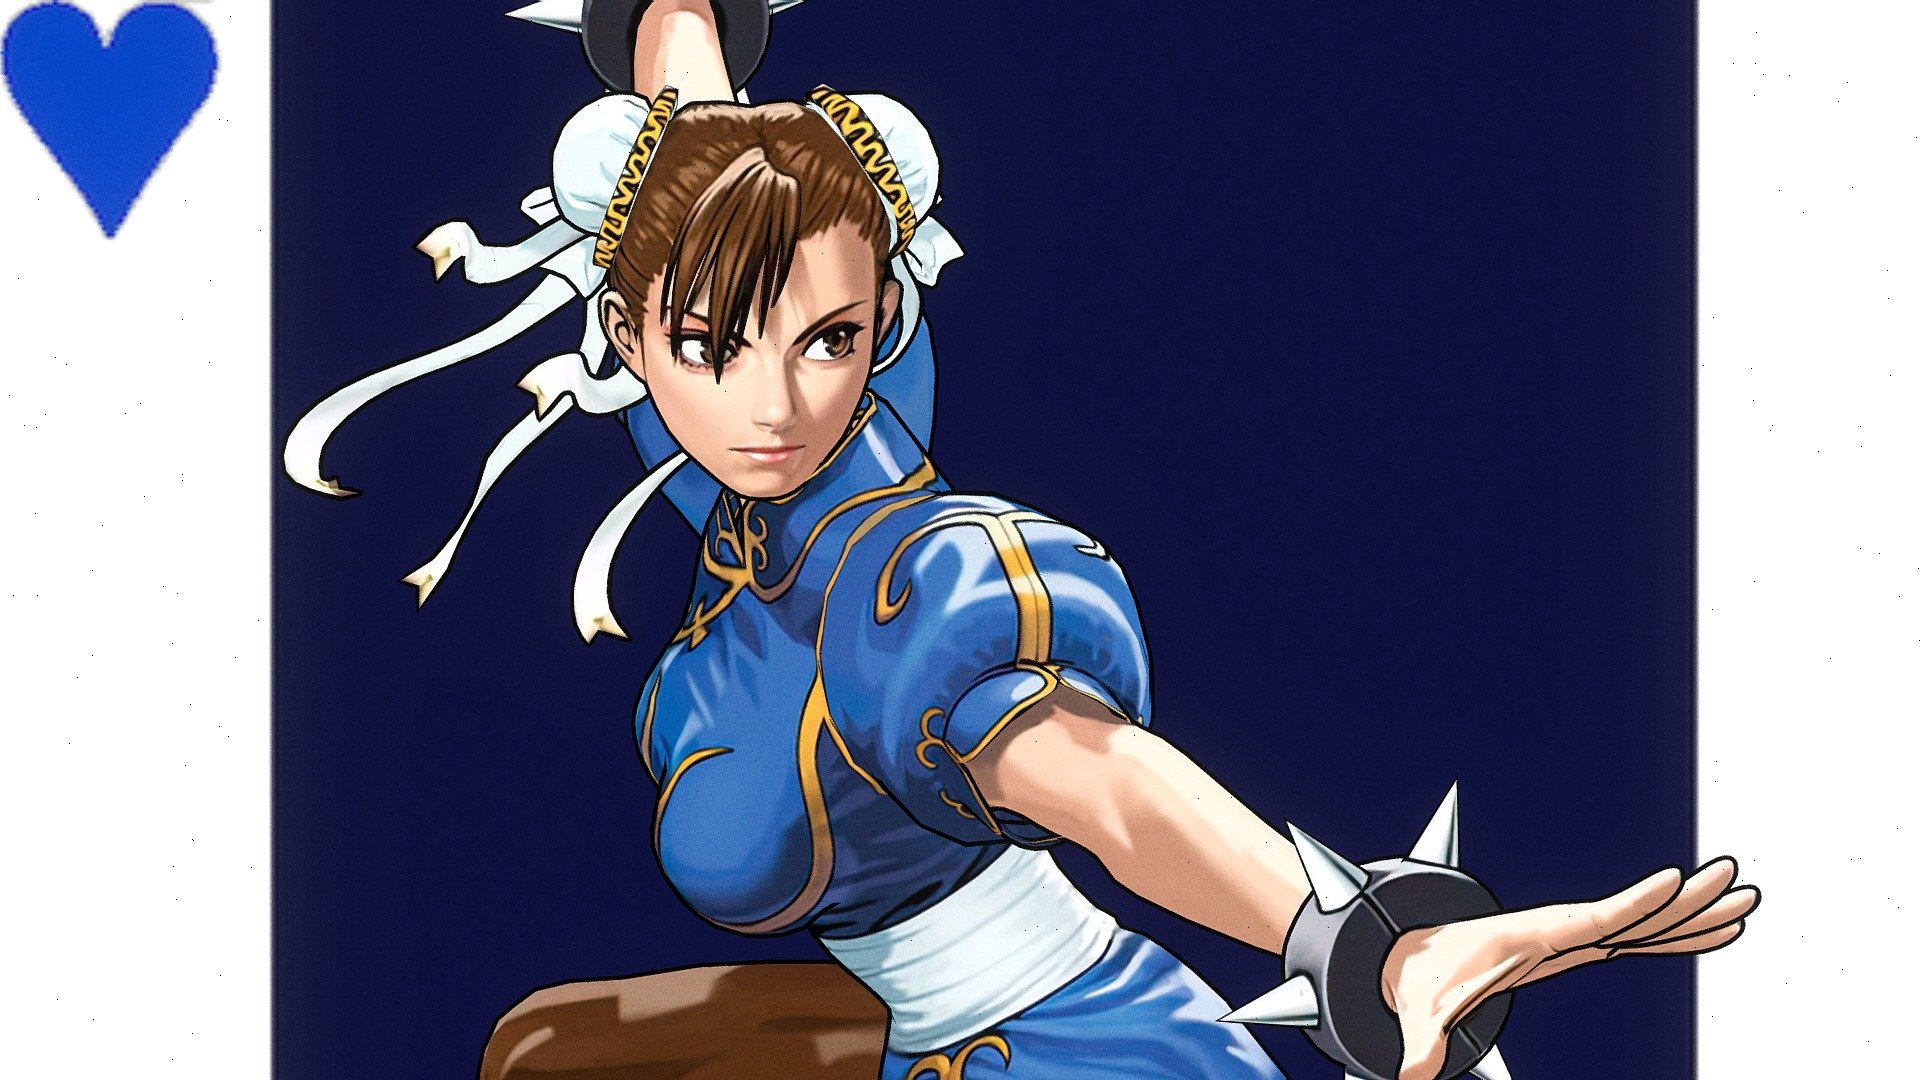 This is my take on Chun-Li from the Artwork of Shinkiro (I think?)
I think its from Tatsunoko vs Capcom.

Looking foward for the new Street Fighter 6!!



Of course it’s not a 100% accurate model, had to adjust a lot of stuff to make it work since i’m not as good as him.

Ofc i did to express my admiration for the Artist, since i always loved Street Fighter!!!

Here, as always,  you can find my link tree at https://linktr.ee/romelus3d Made in Blender/Krita. (Amazing how far free software can get you, thanks for the Dev!)

*NoHorny - Chun-Li Tatsunoko vs Capcom Street Fighter - 3D model by Romélus 3D (@Romelus) 3d model